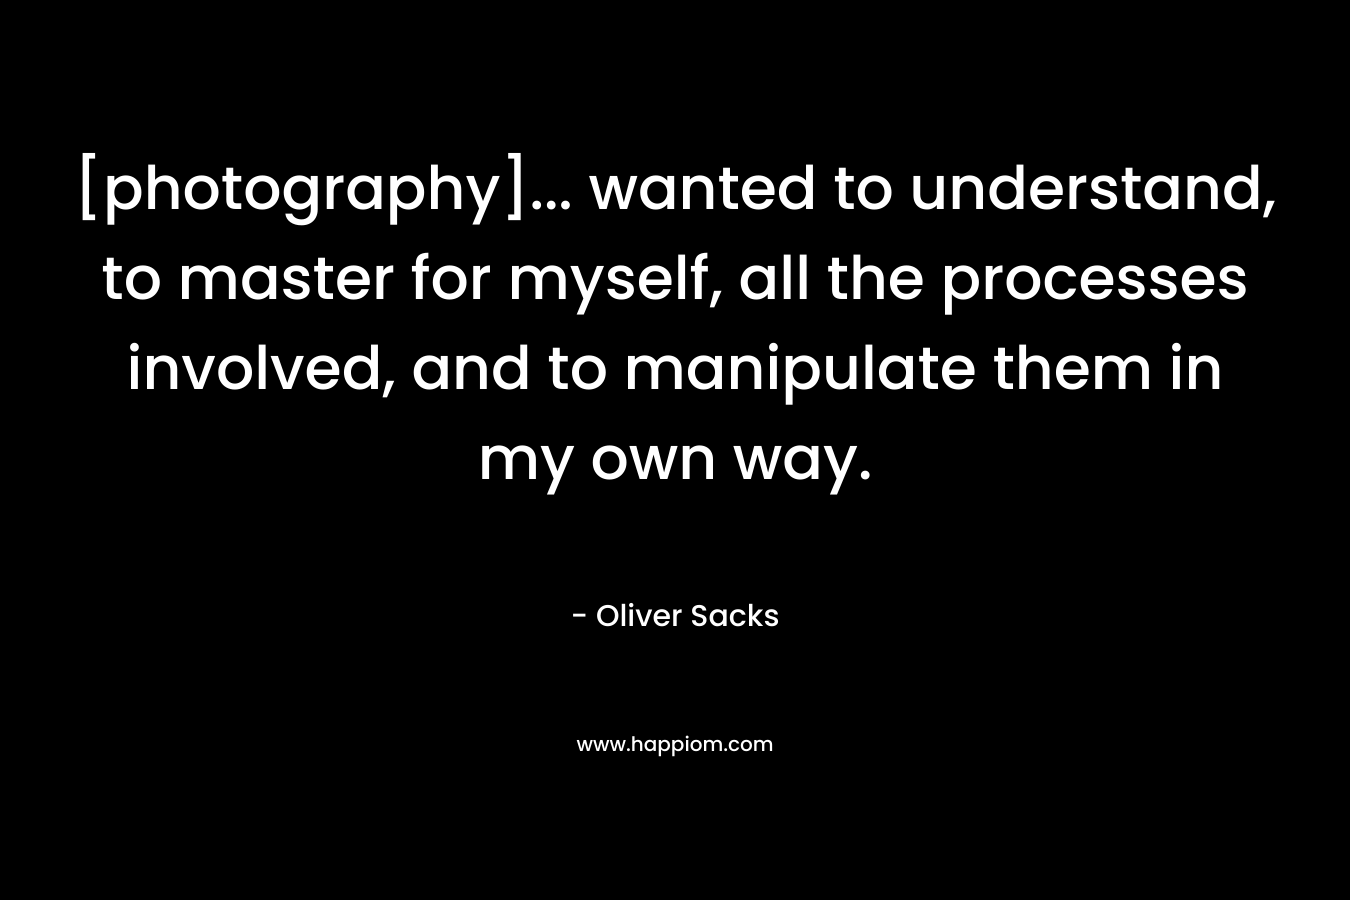 [photography]… wanted to understand, to master for myself, all the processes involved, and to manipulate them in my own way. – Oliver Sacks